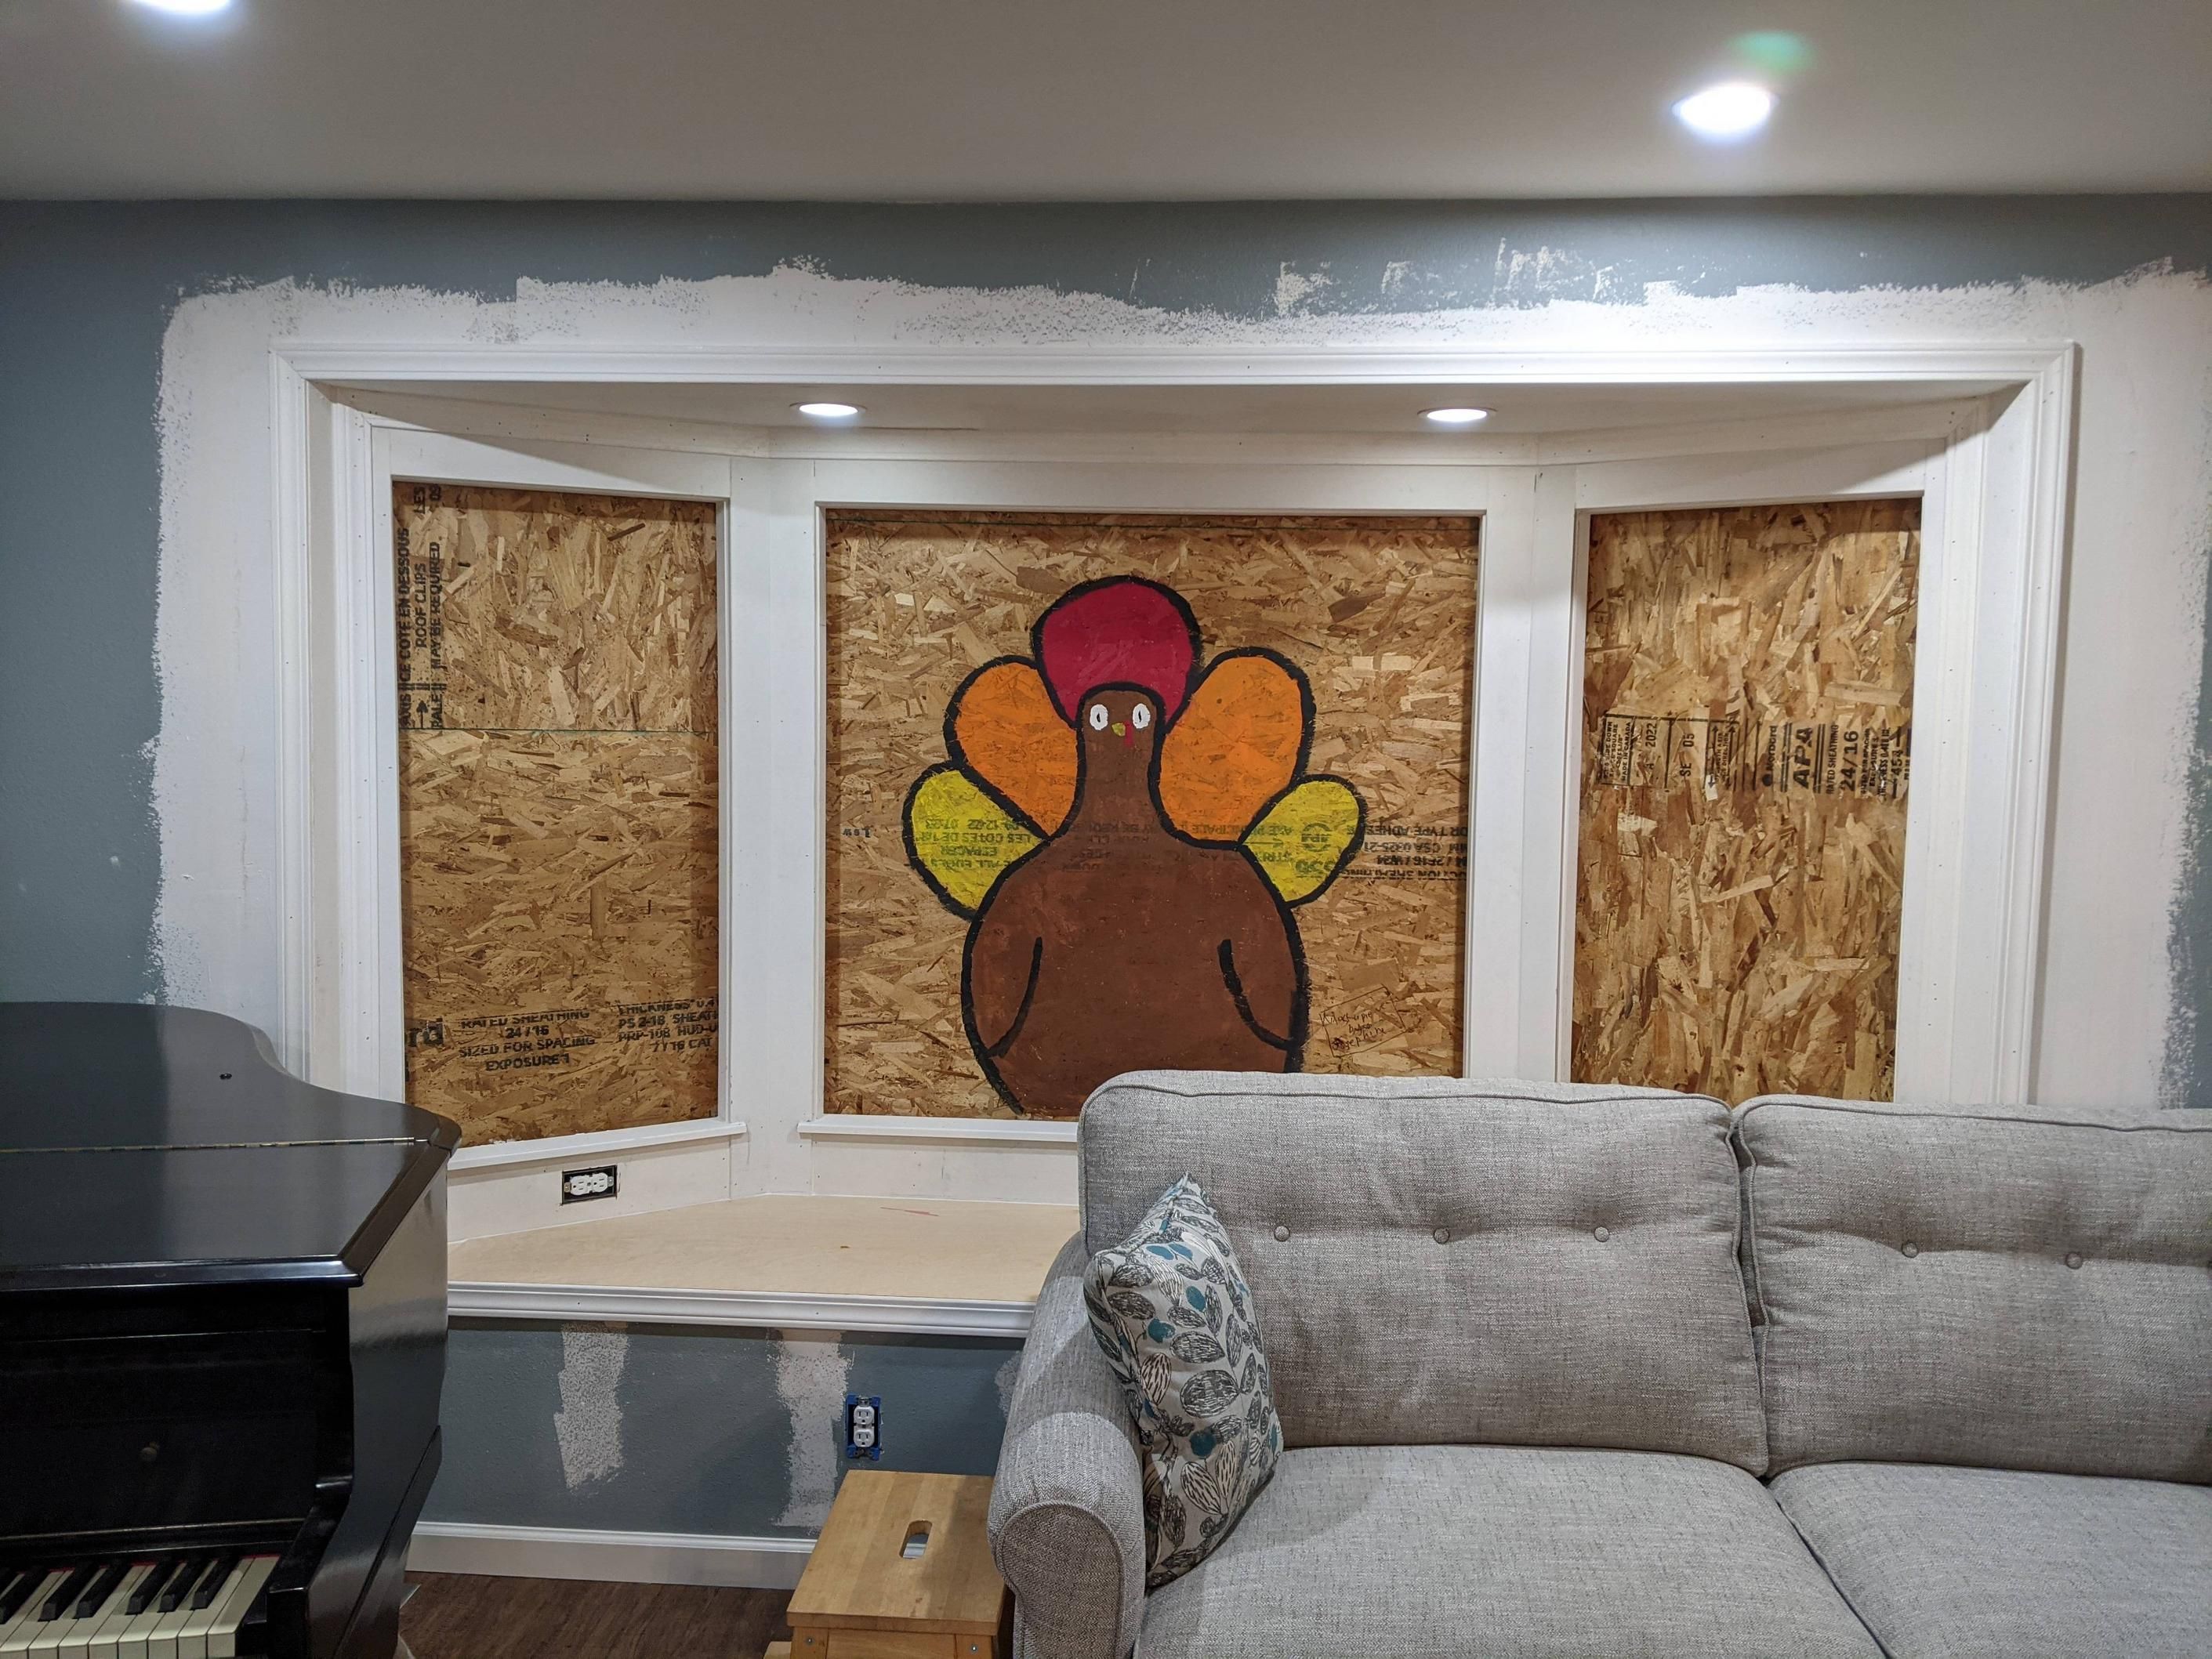 A remodel project did not get completed in time for Thanksgiving, so my daughter painted a turkey on the plywood